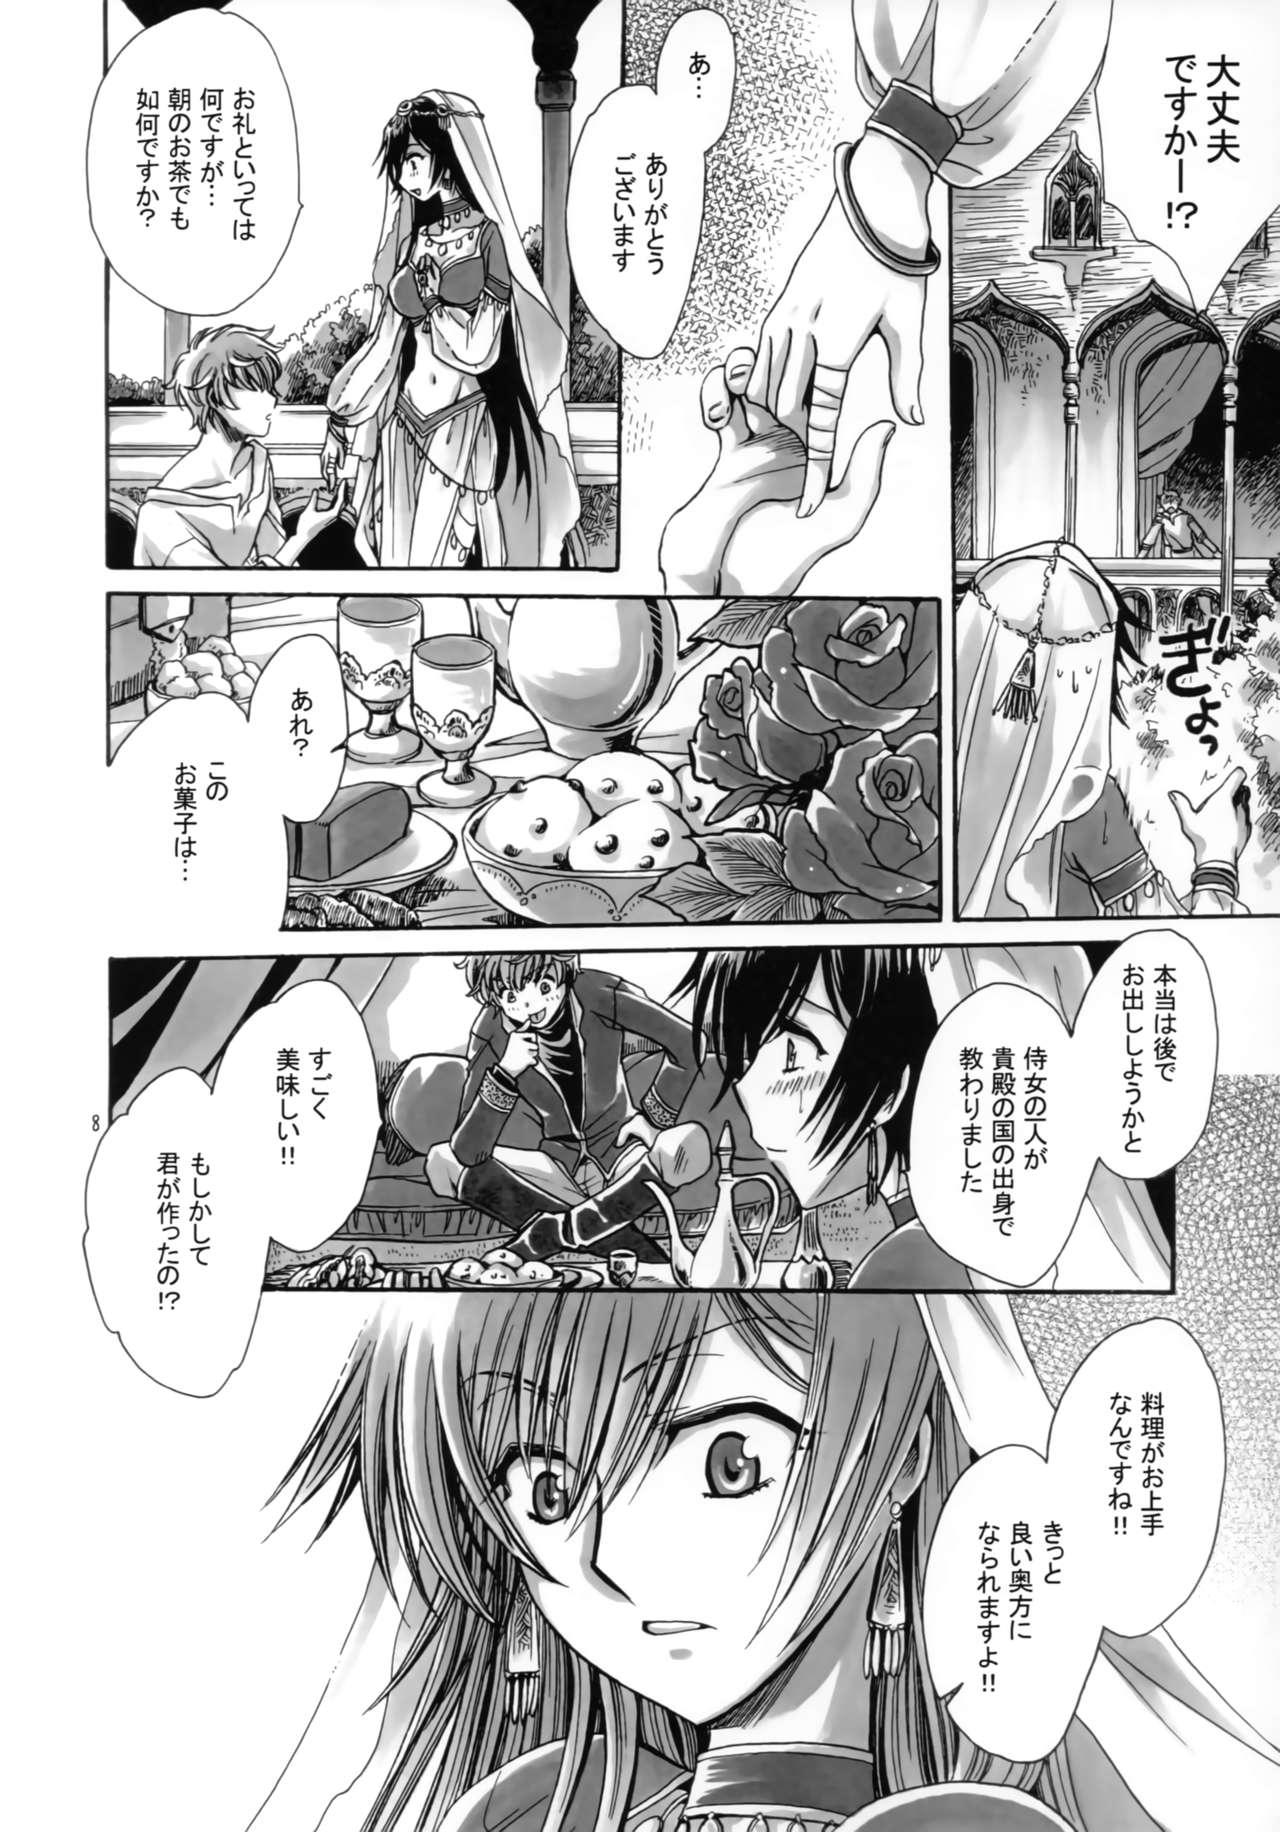 Virgin a lot of Princesses - Code geass Colombia - Page 7